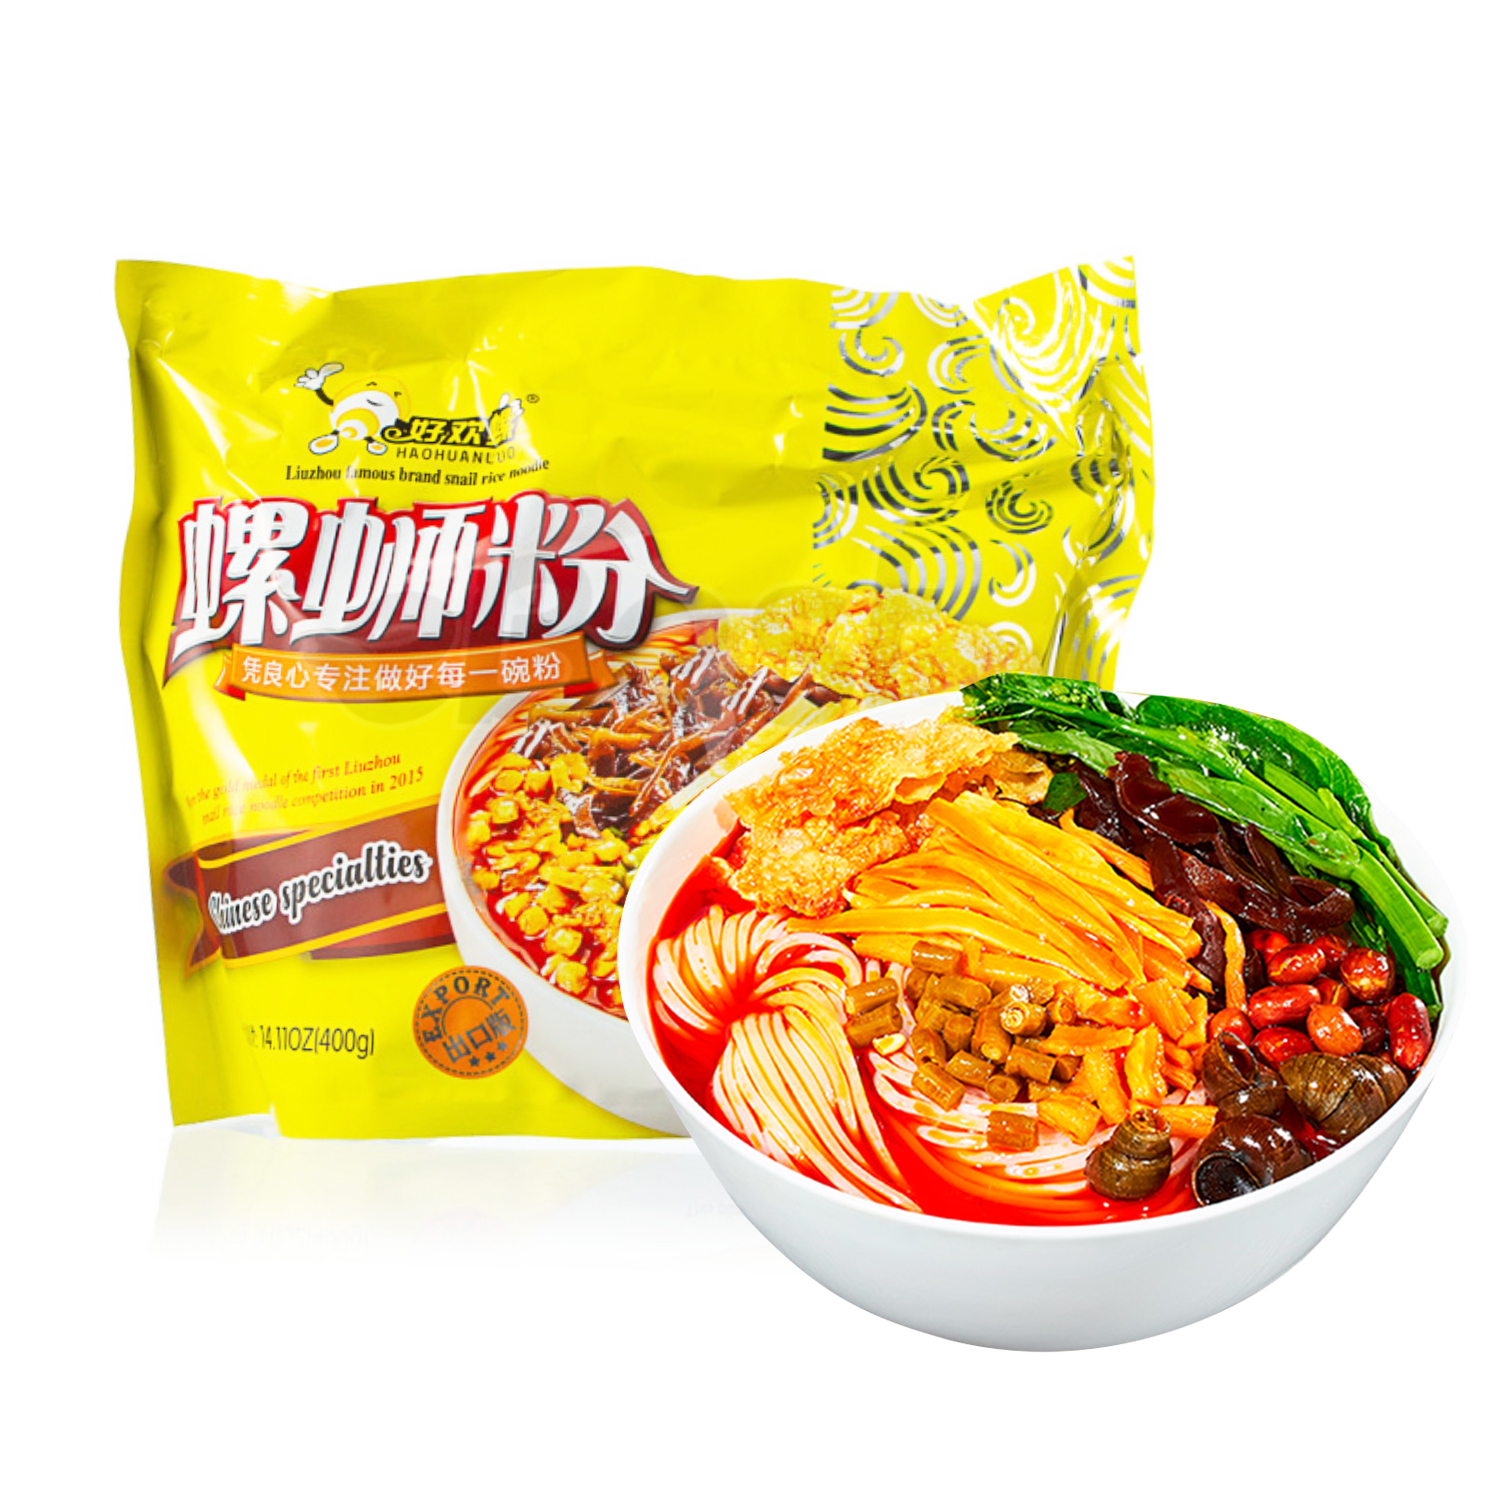 Haohuanluo Snail Vermicelli 400g-eBest-Weekly Special,Instant Noodles,Instant food